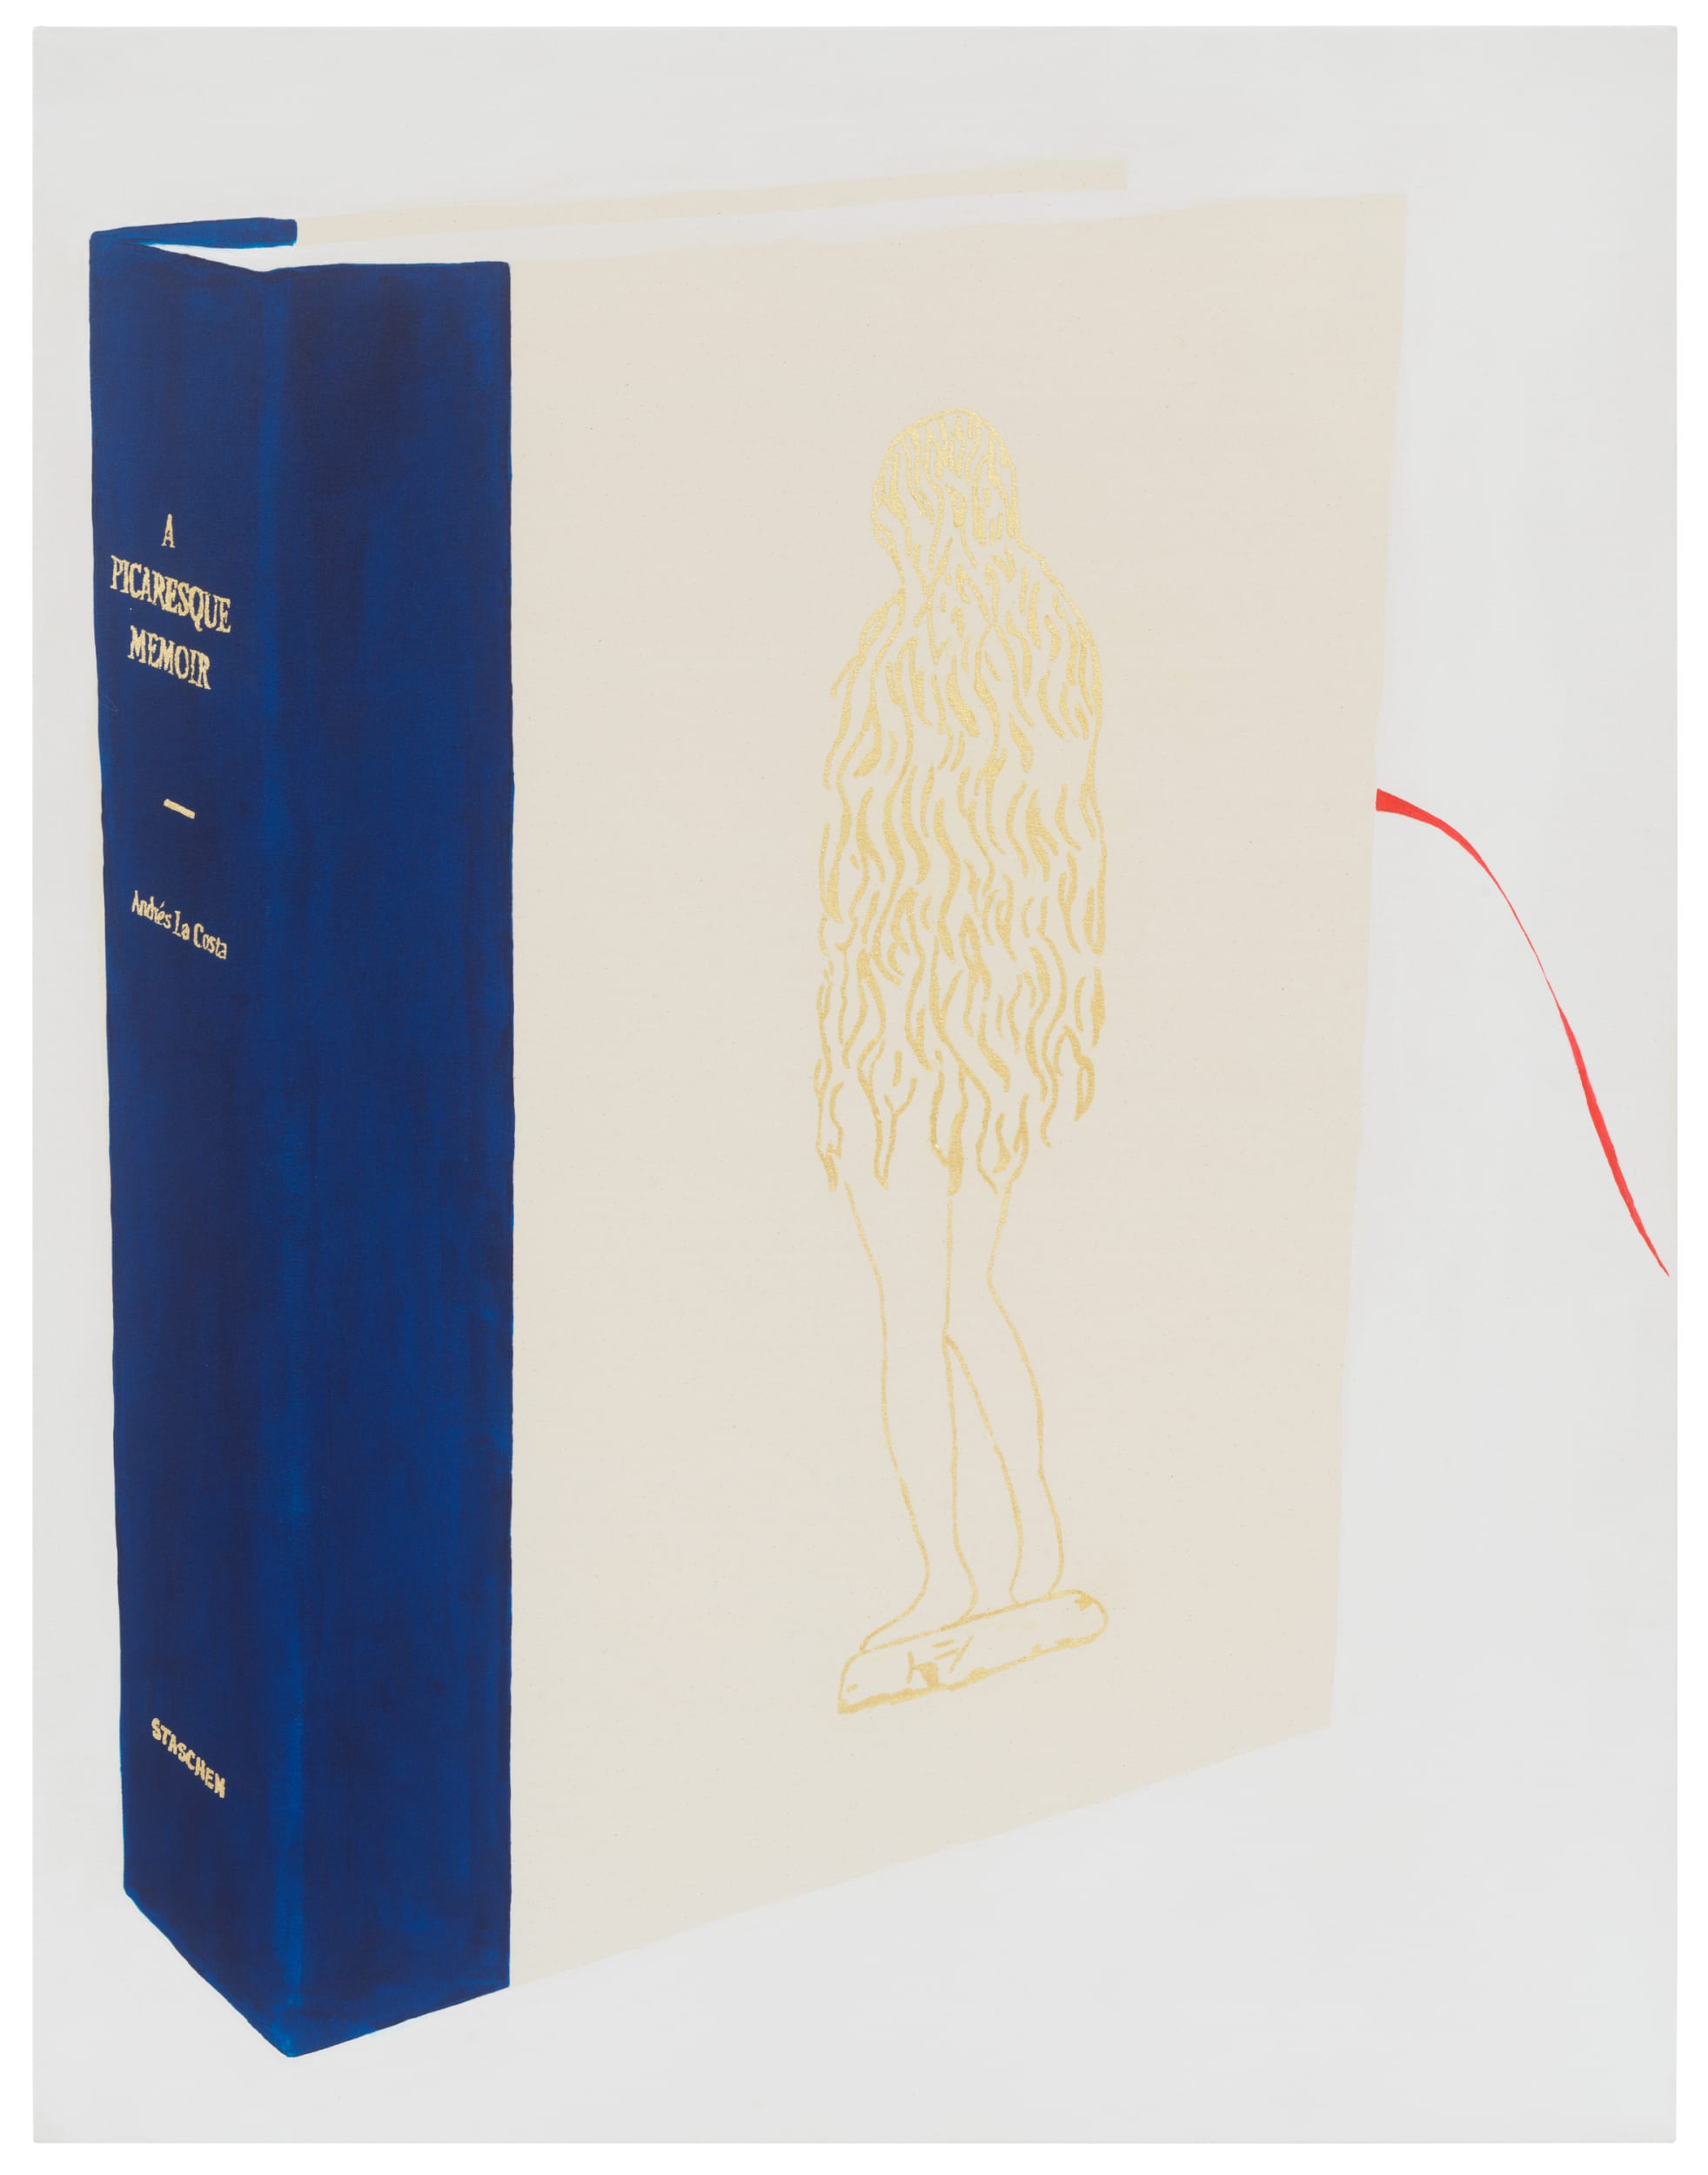 “A book object made for Parkett in 2013 called Dishonest But Appealing”